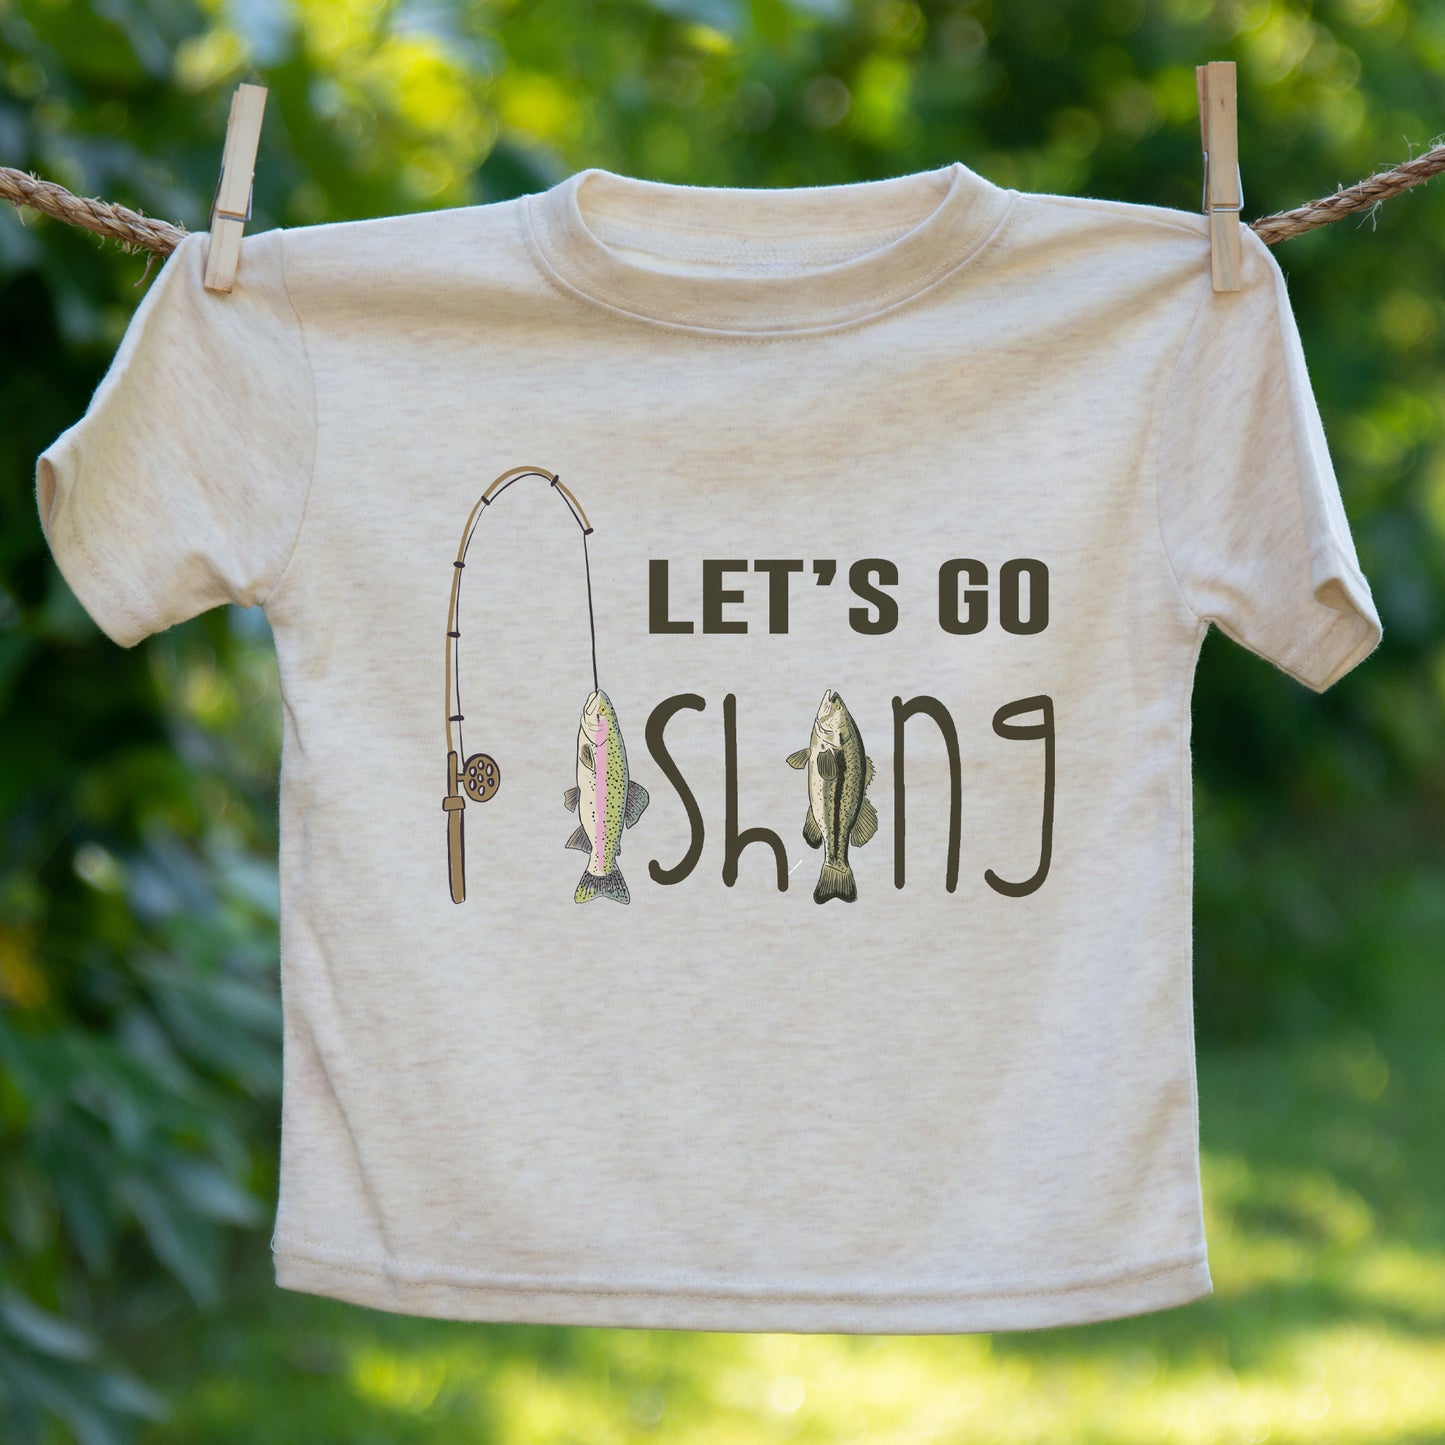 "Let's go fishing" Toddler/Youth Summer shirt